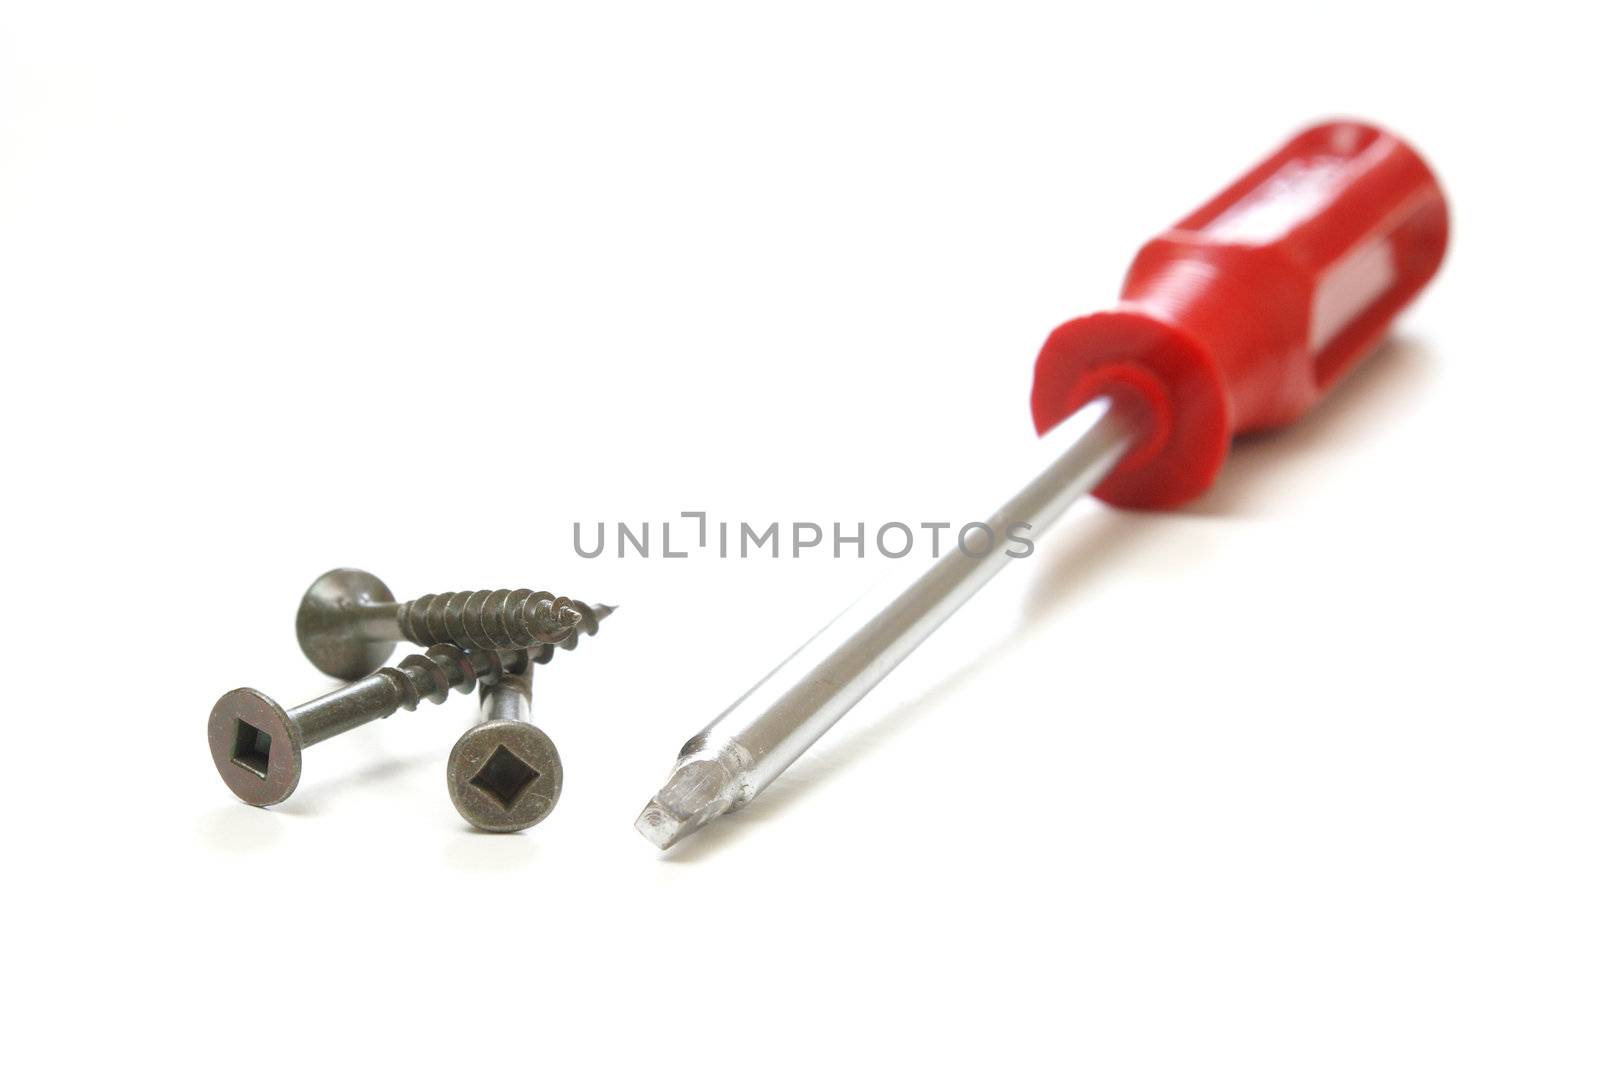 A square-head screwdriver with square-head screws on a white background.